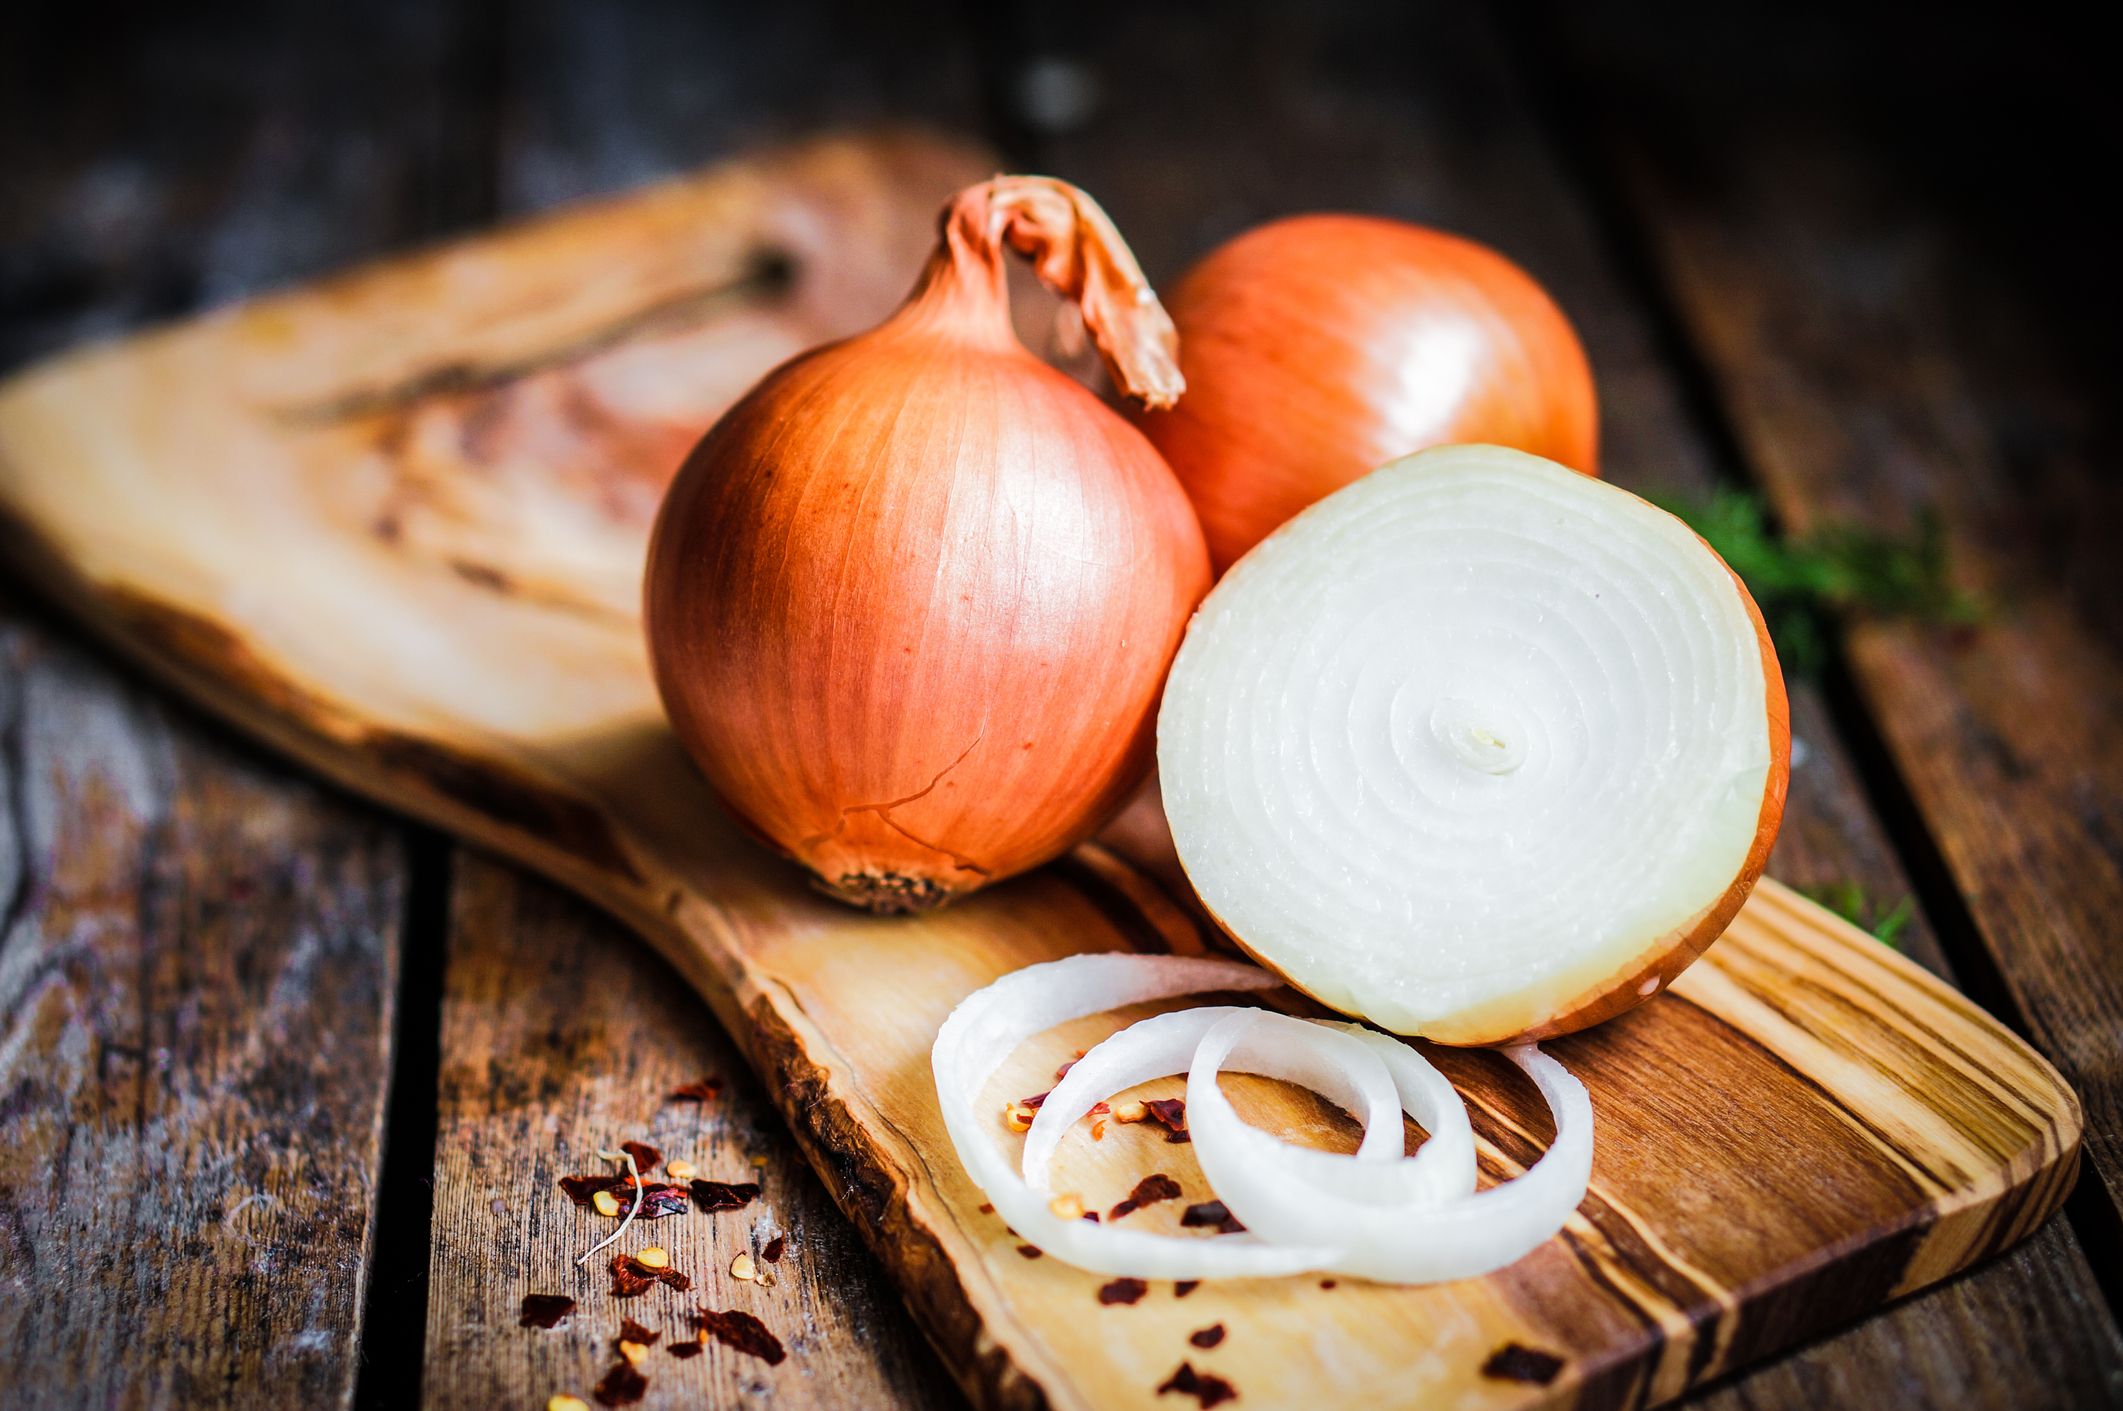 https://hips.hearstapps.com/hmg-prod/images/golden-onions-on-rustic-wooden-background-royalty-free-image-1584040566.jpg